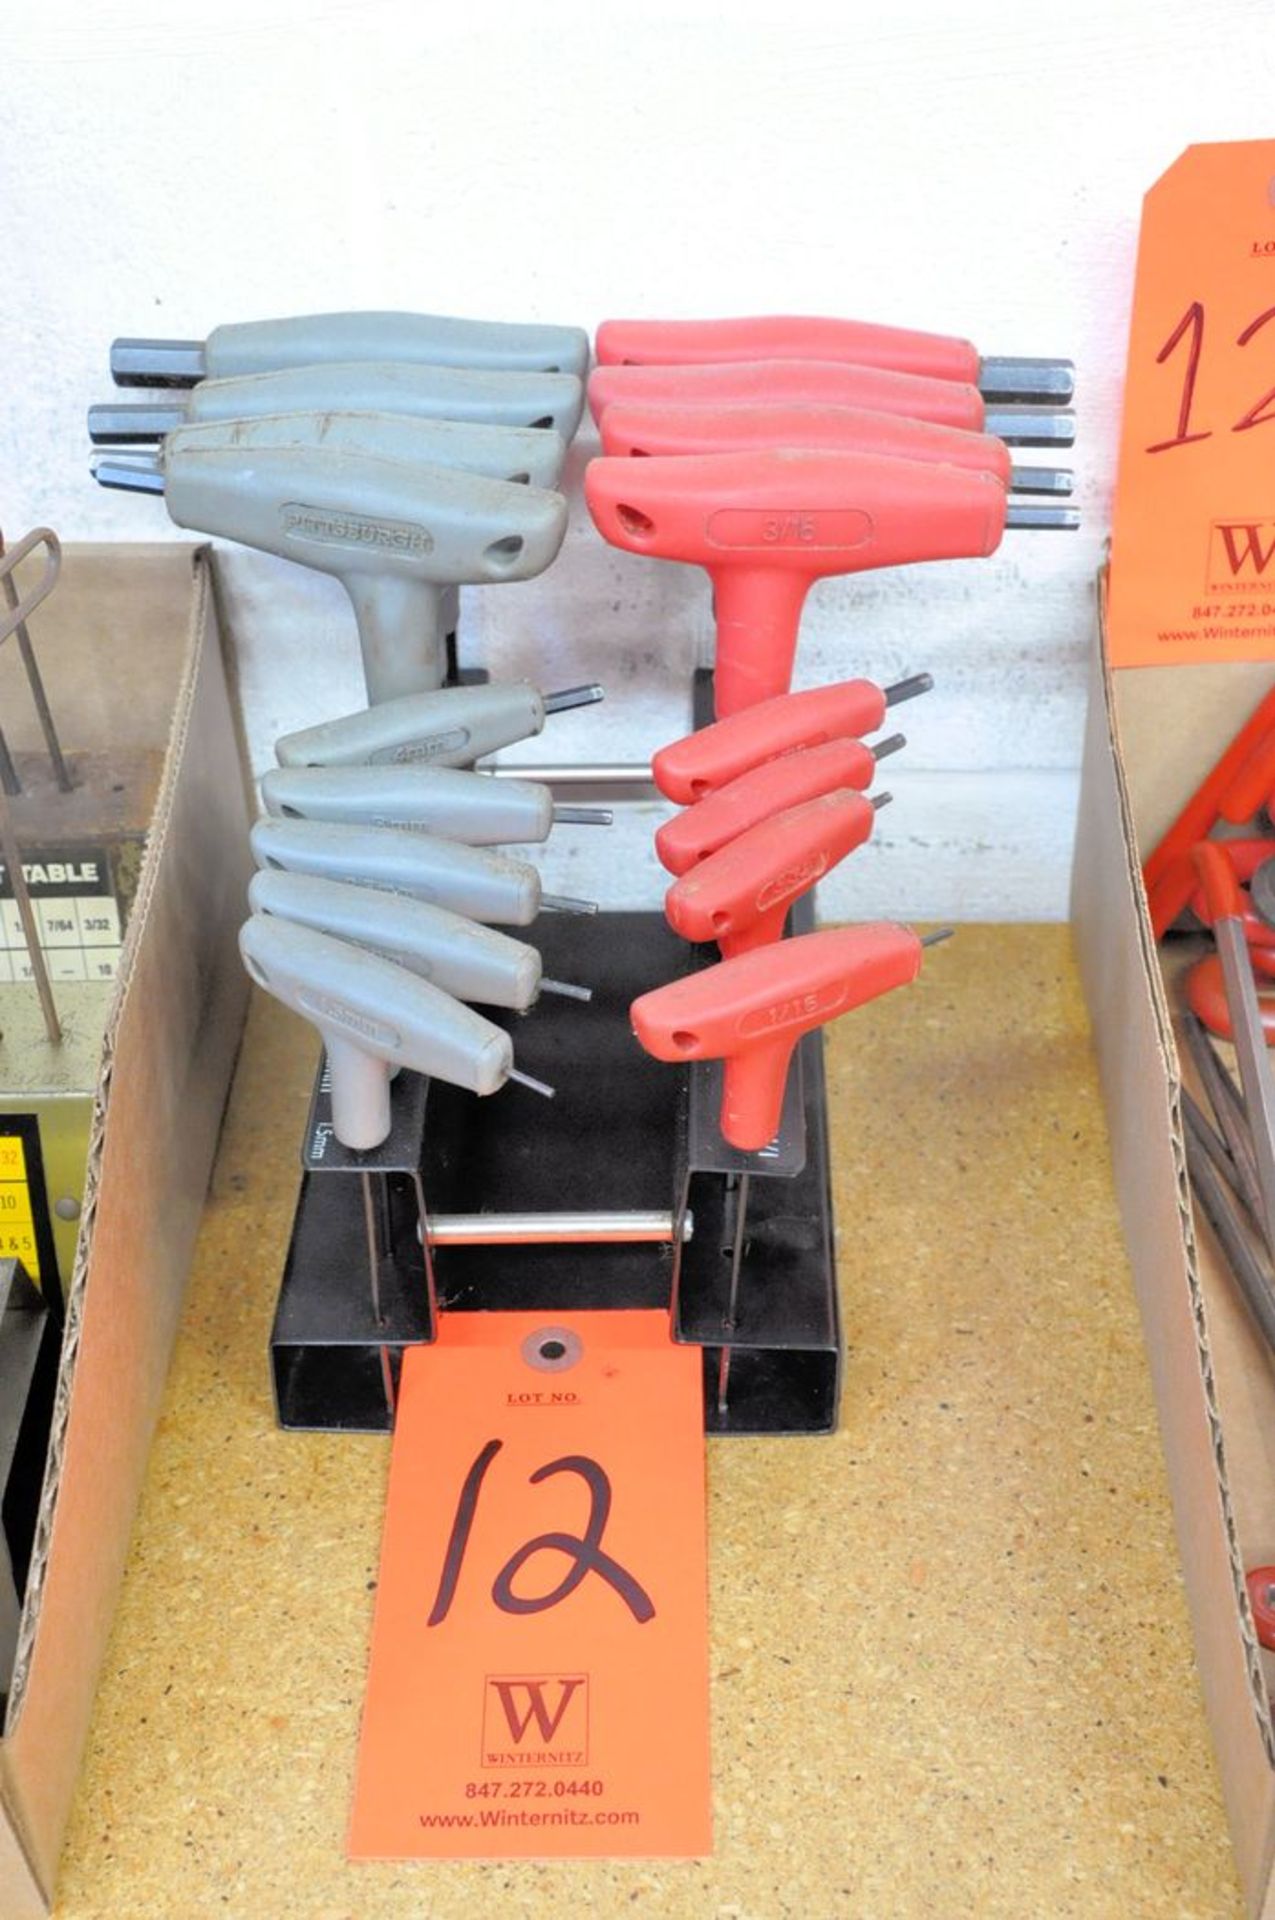 Lot - T-Handle Allen Wrenches with Sets in (2) Boxes - Image 3 of 4